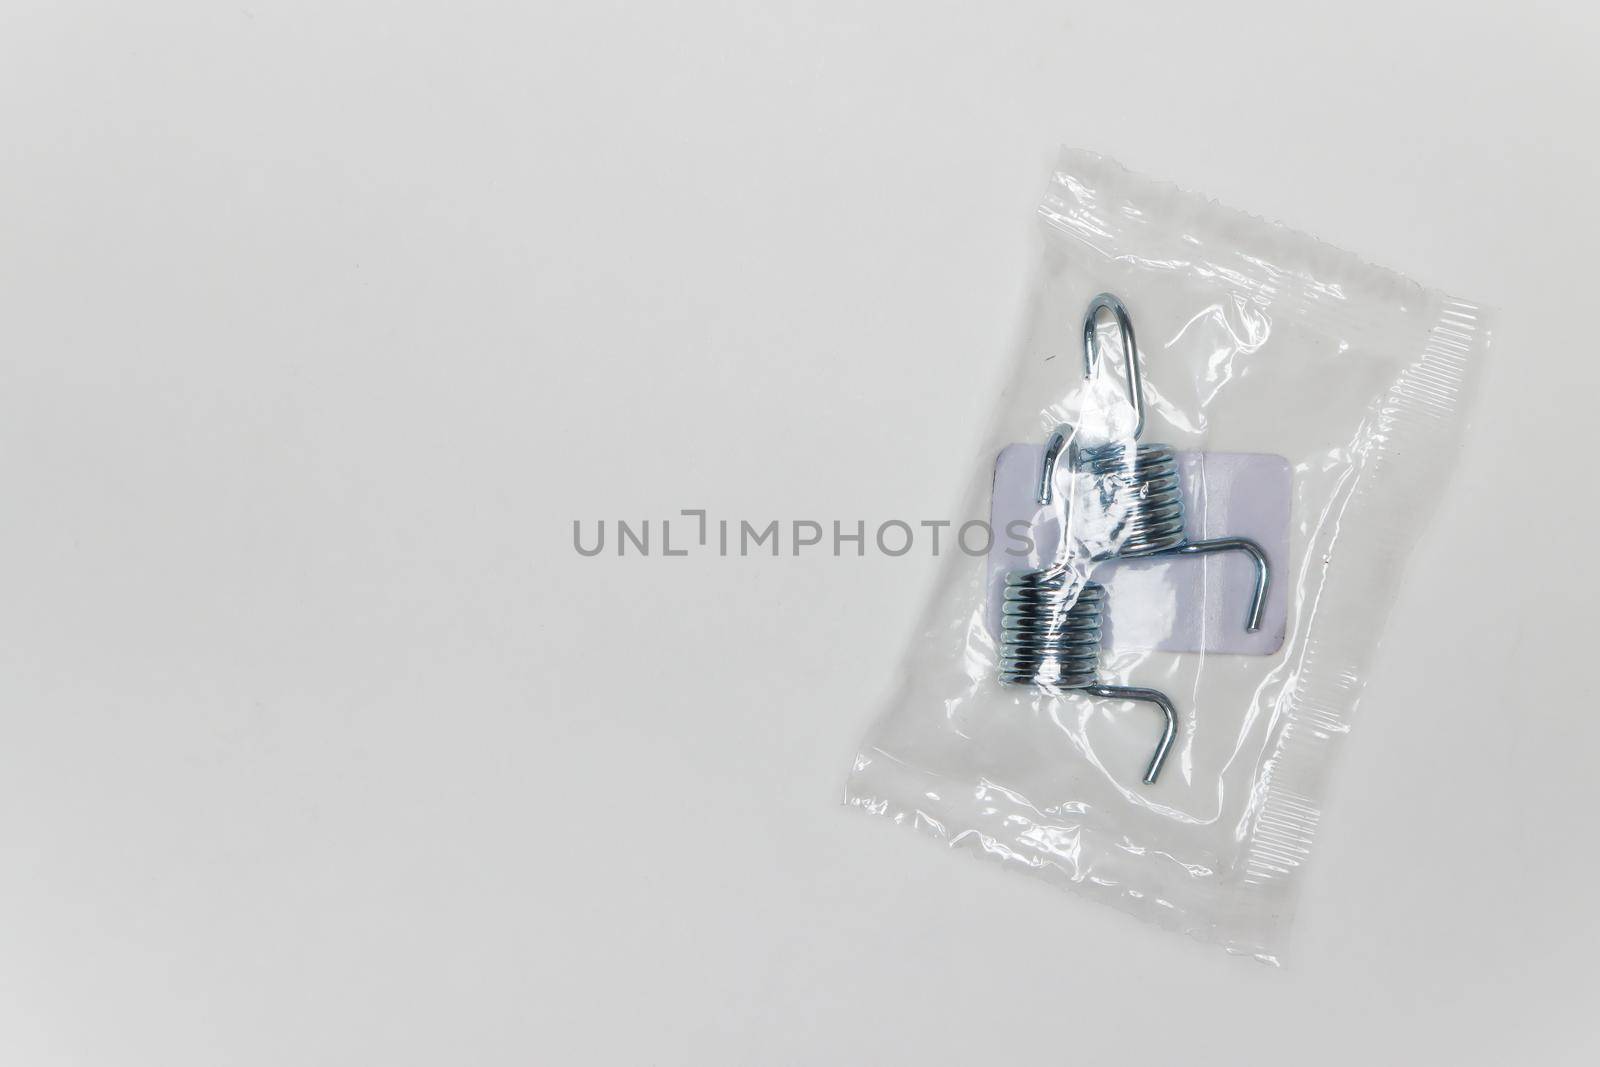 Repair kit for brakes, two metal springs per package. Set of spare parts for car brake repair. Details on white background, copy space available. UHD 4K.